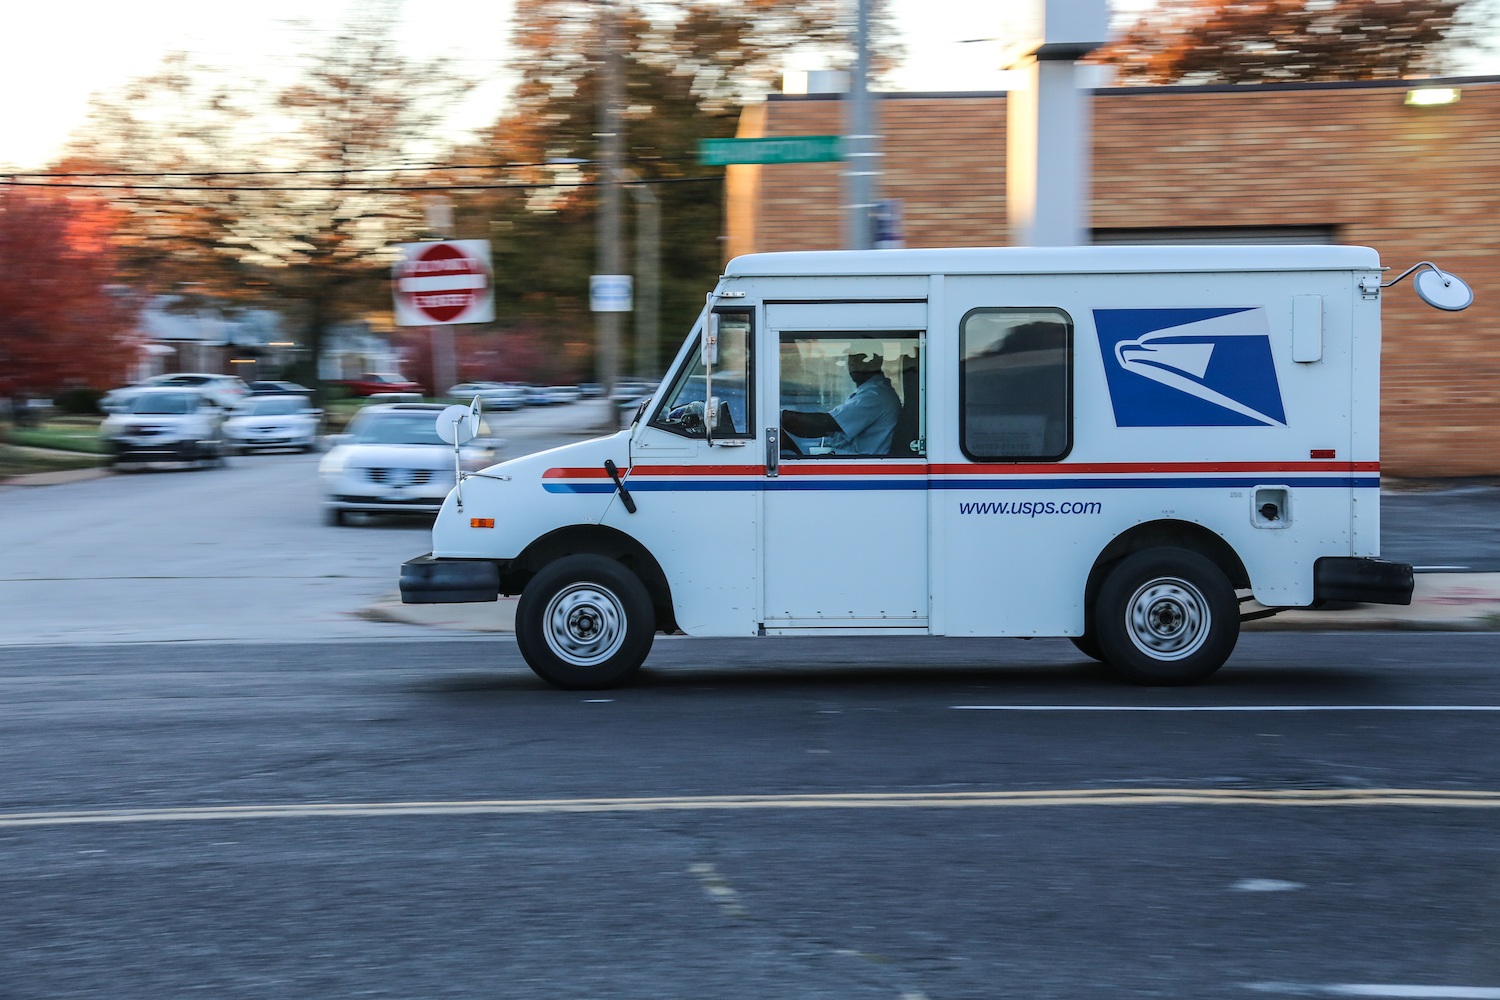 USPS truck drives down the road. October 2020